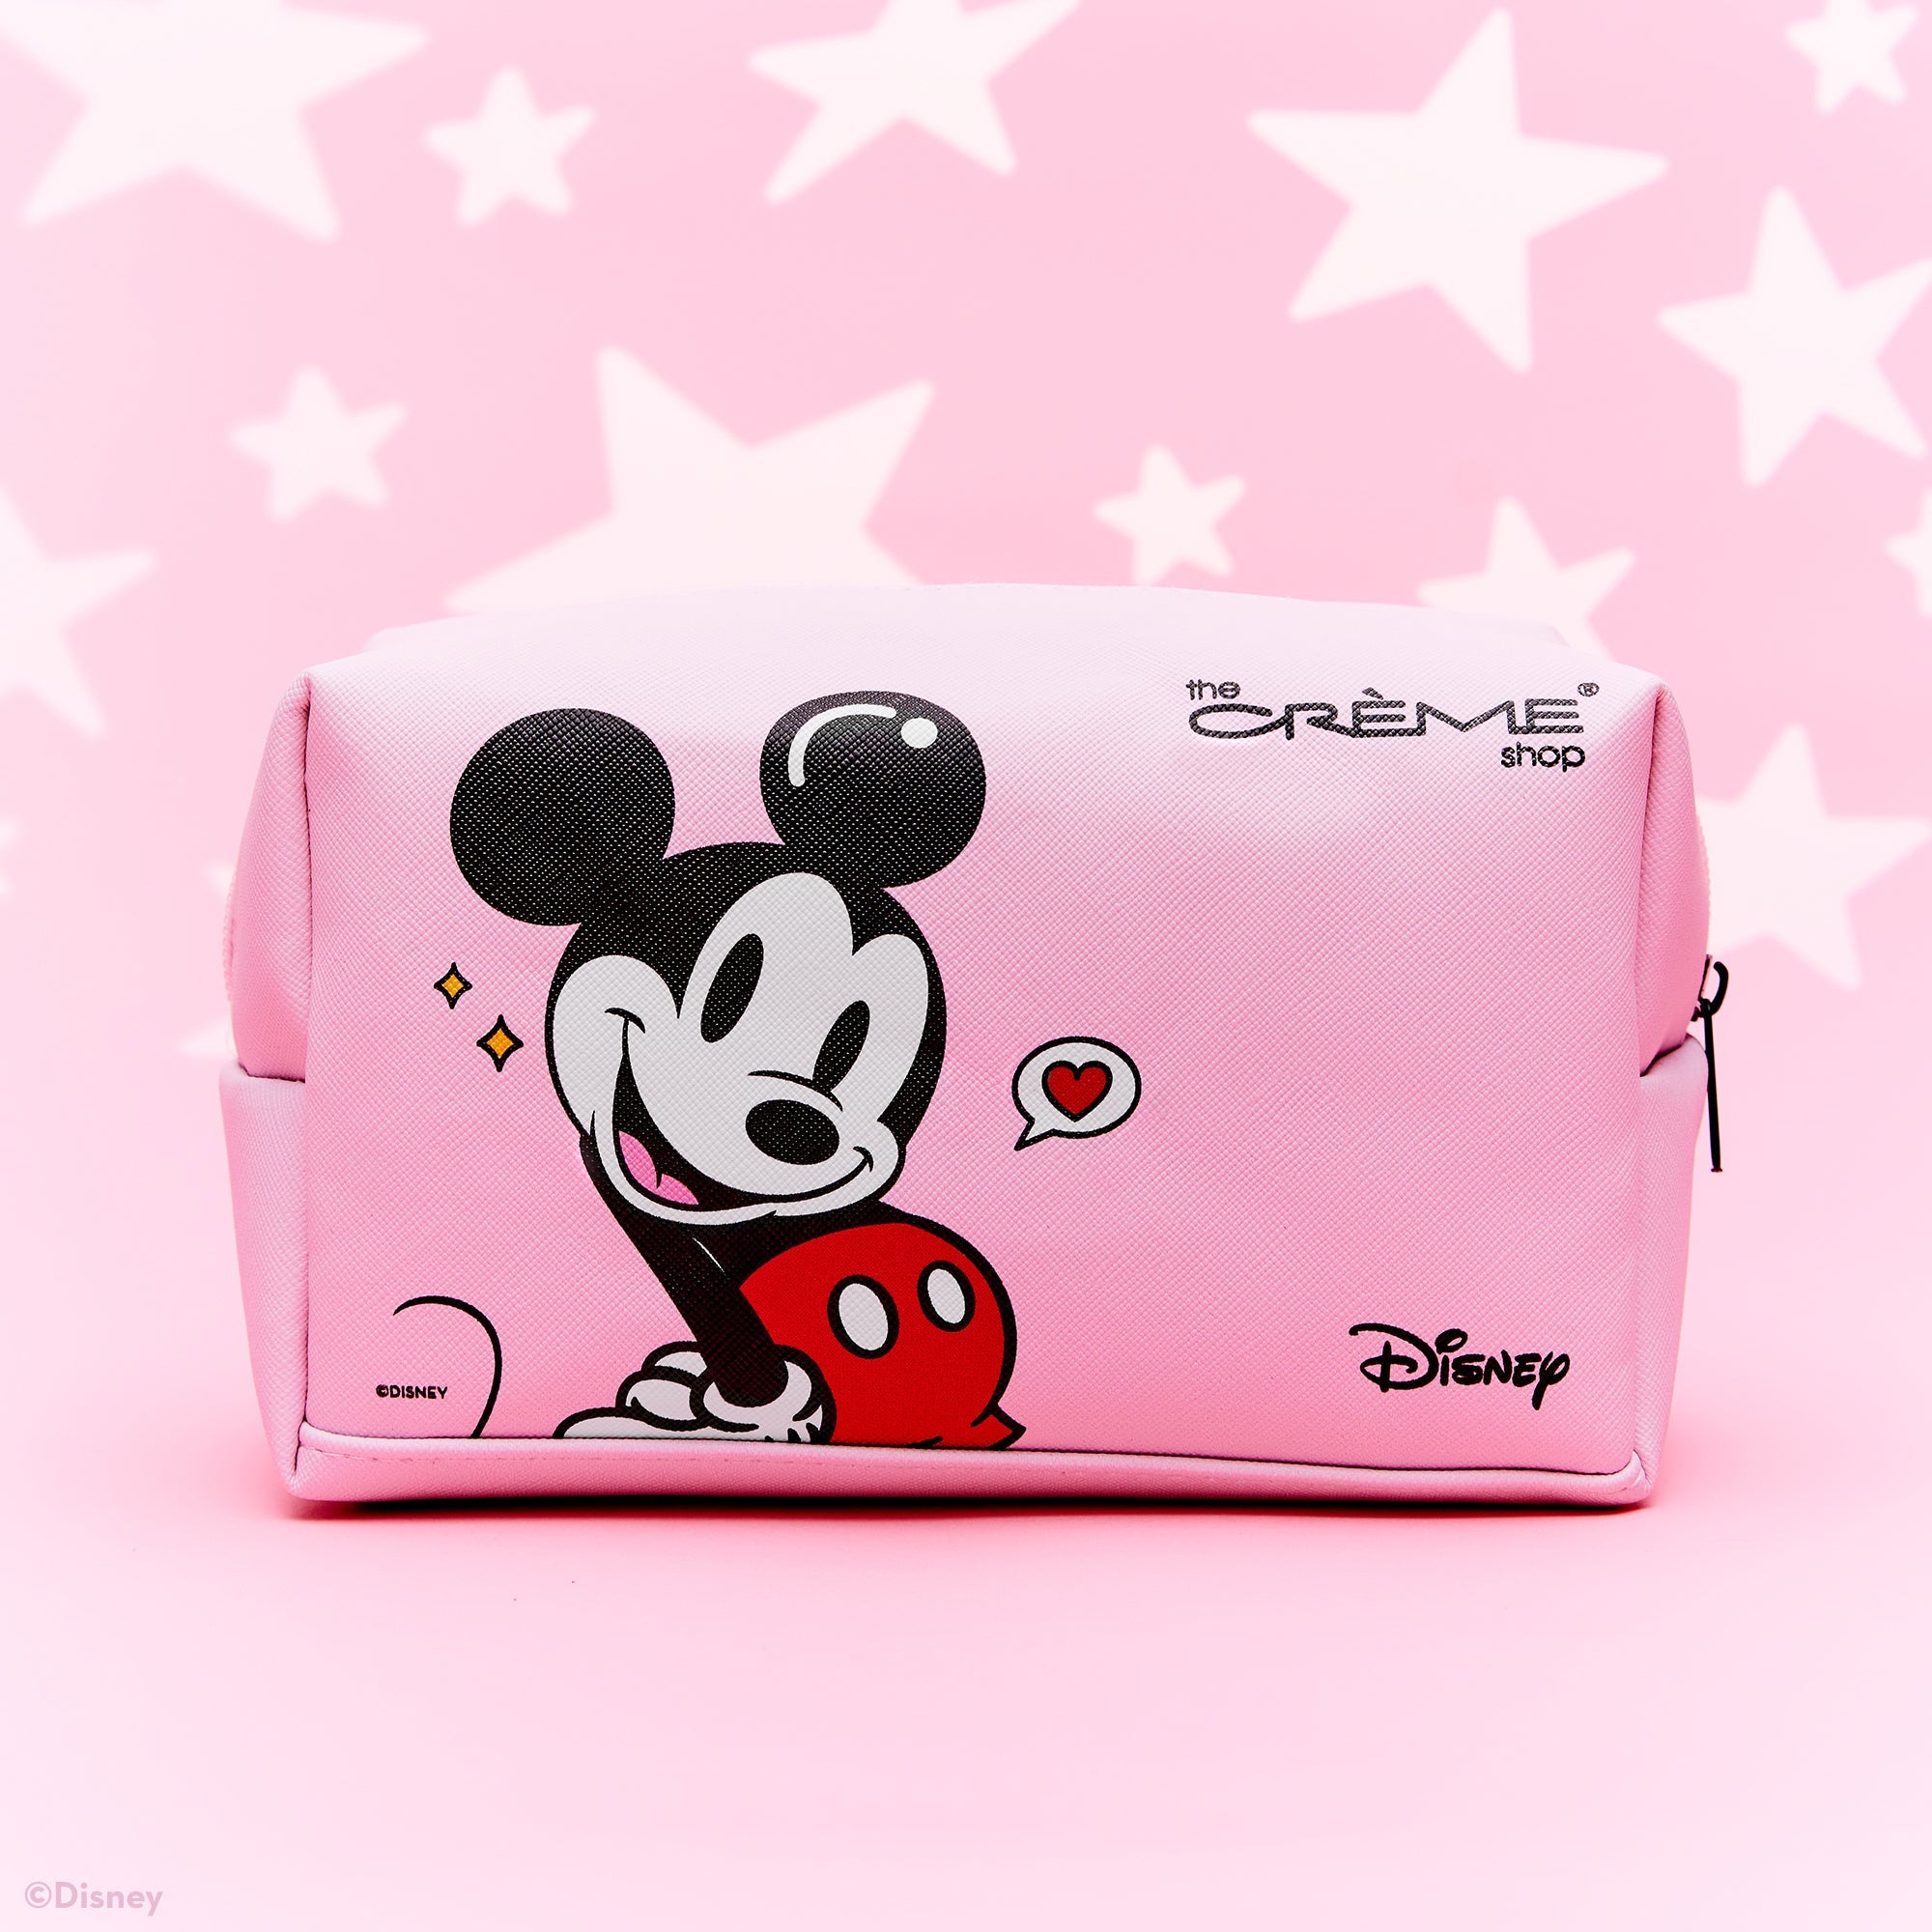 New Minnie Ears Carrying Case Coming To shopDisney Soon - bags